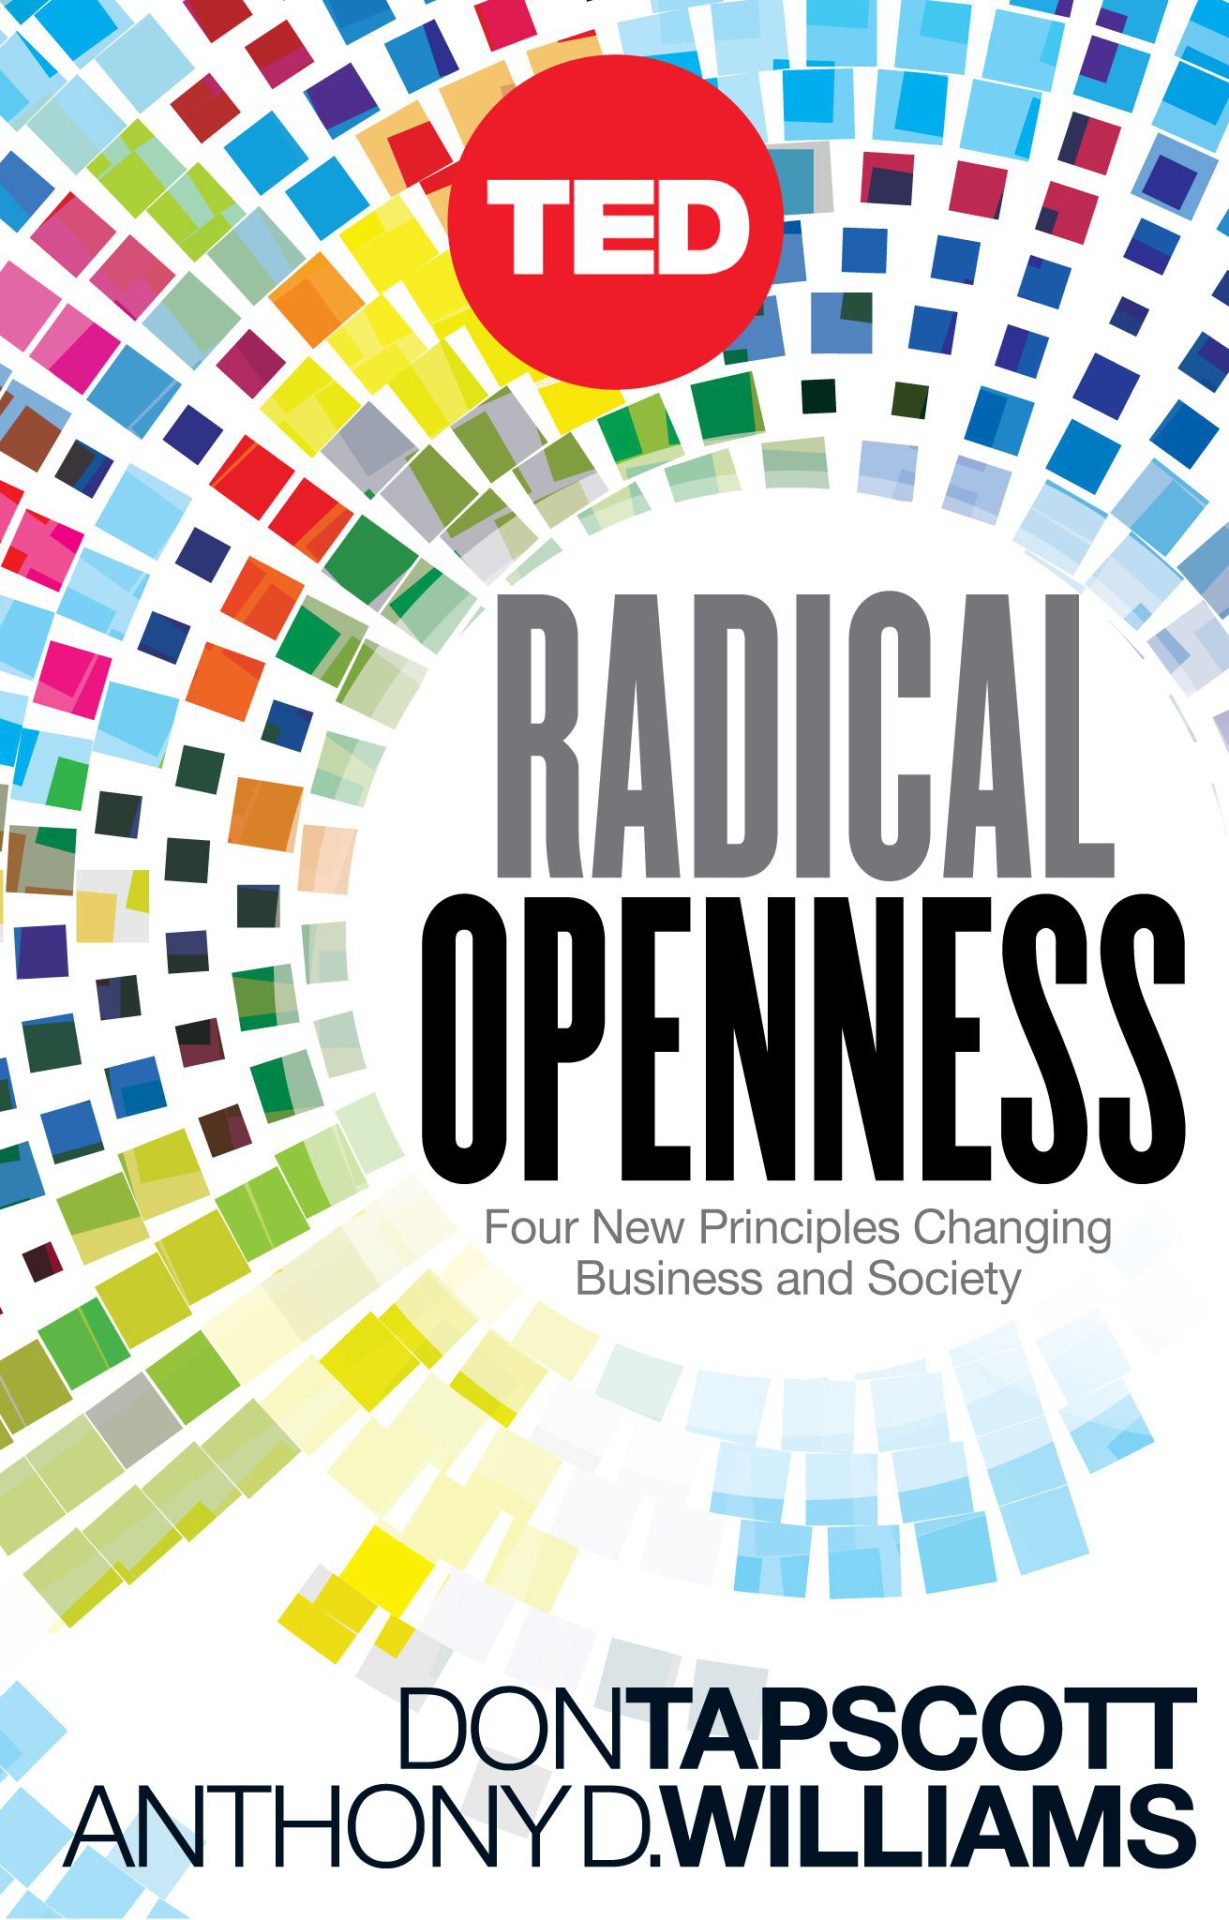 Don Tapscott TED Book Radical Openness